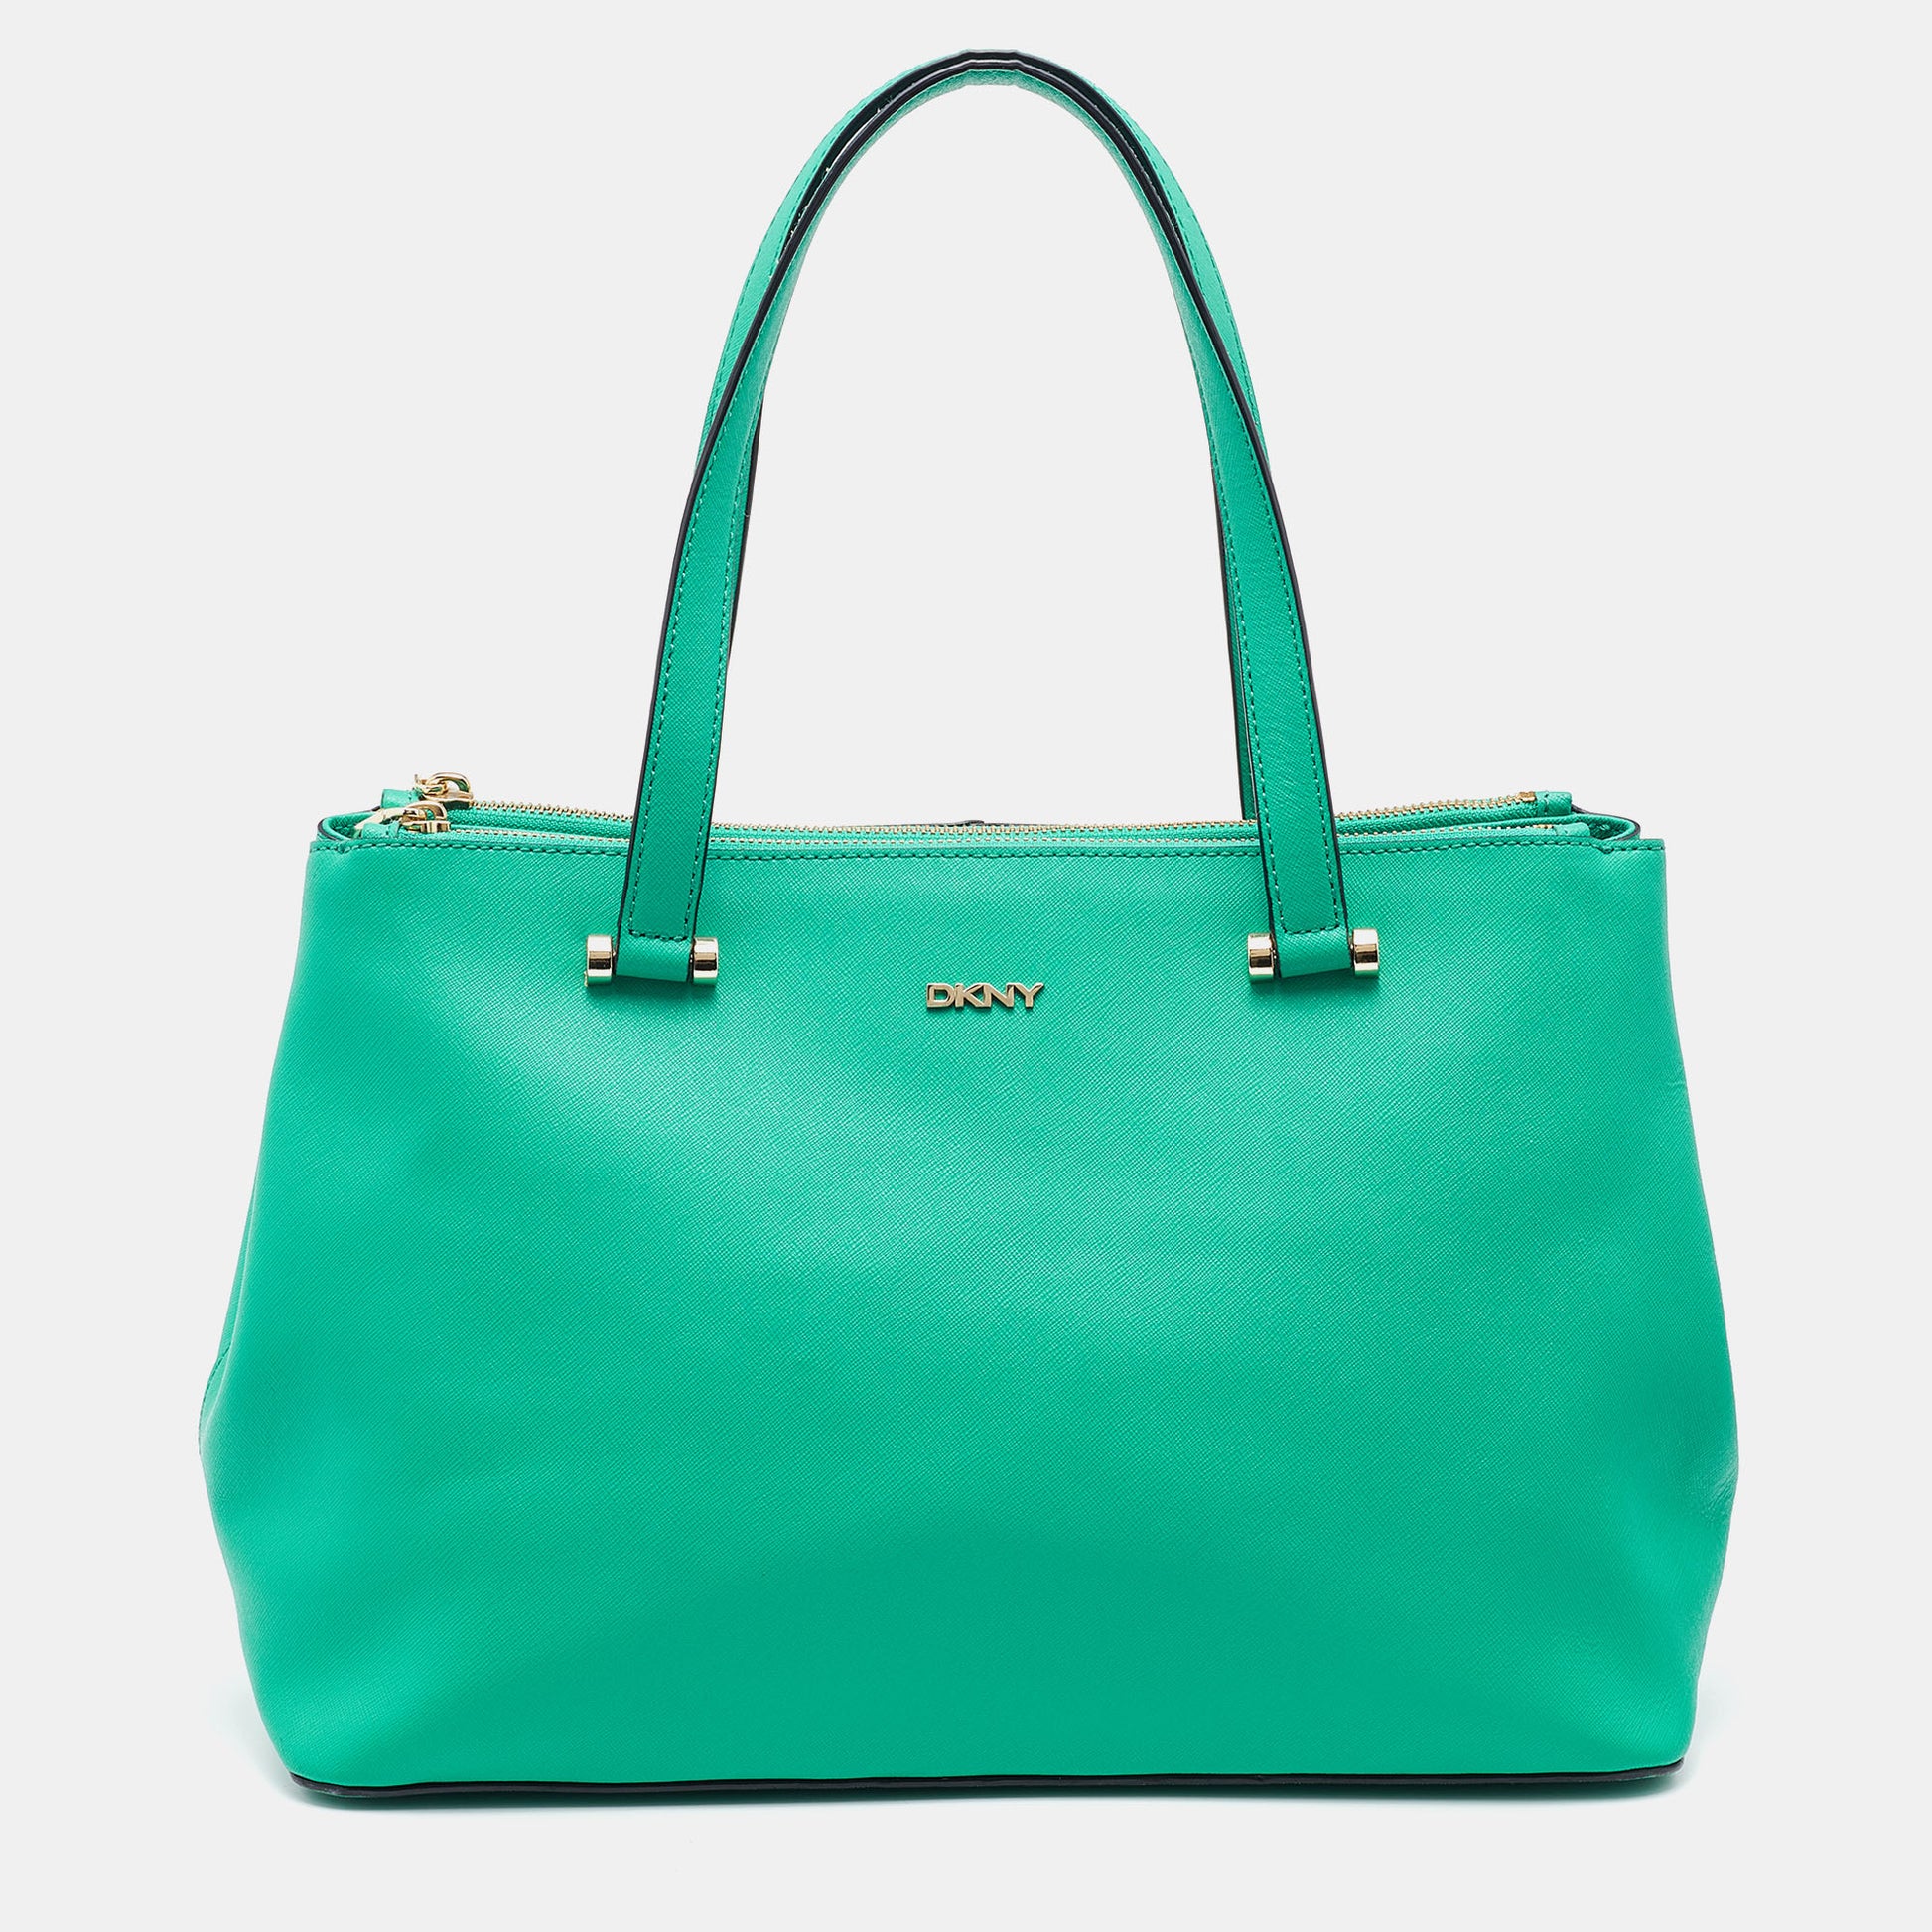 DKNY Green Saffiano Leather Double Zip Tote